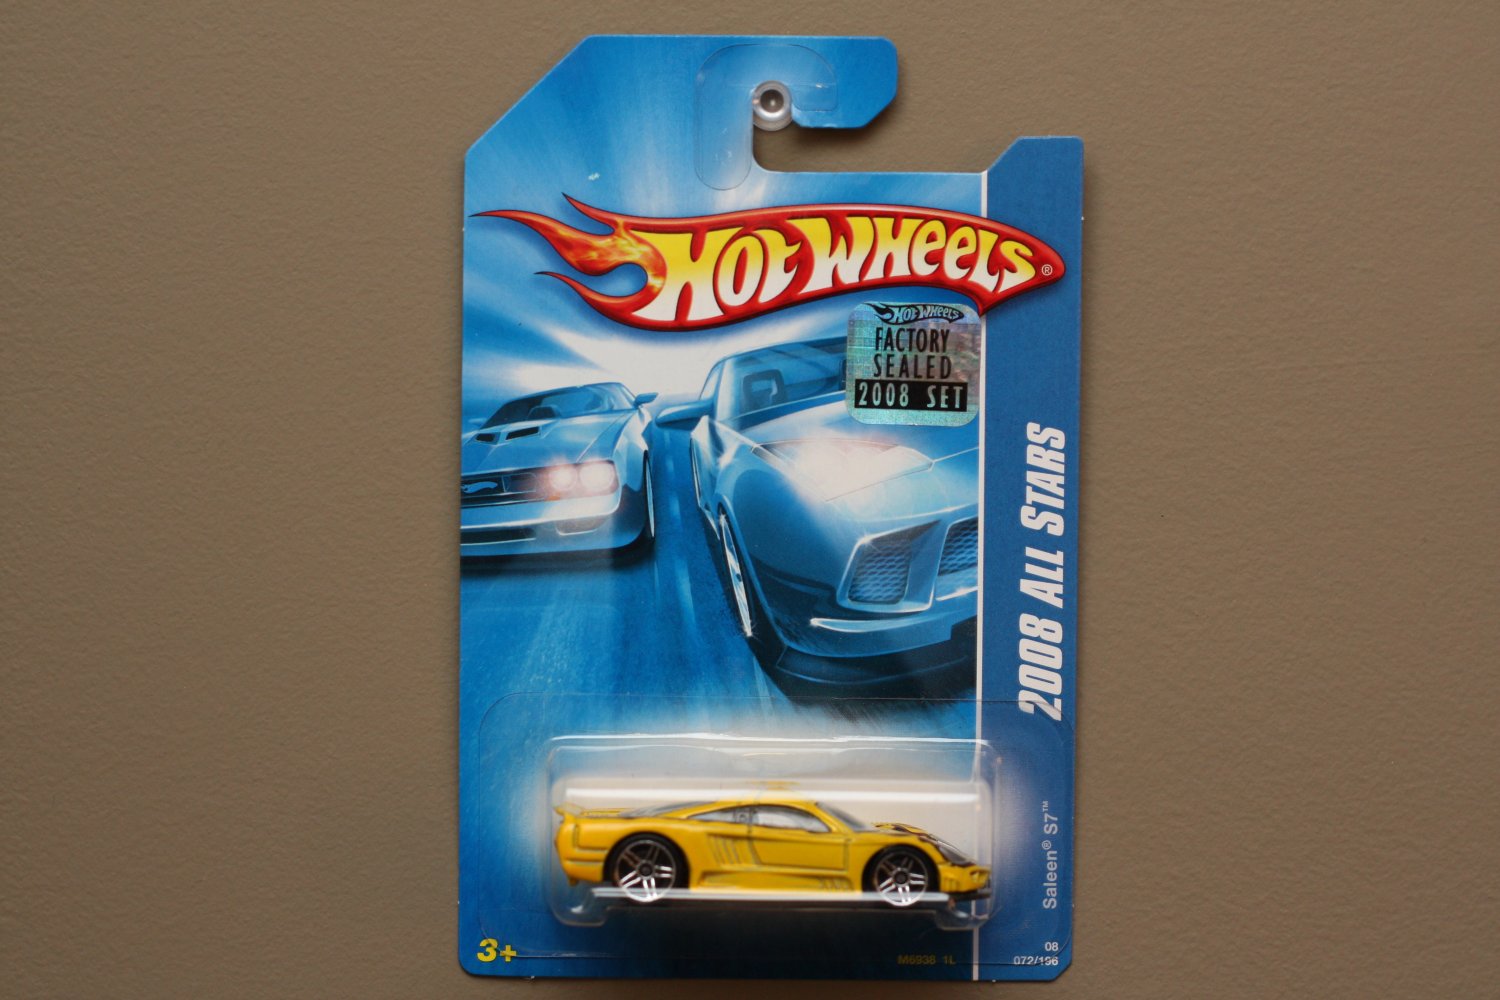 HOT WHEELS 2008 ALL STARS SALEEN S7 YELLOW FACTORY SEALED 